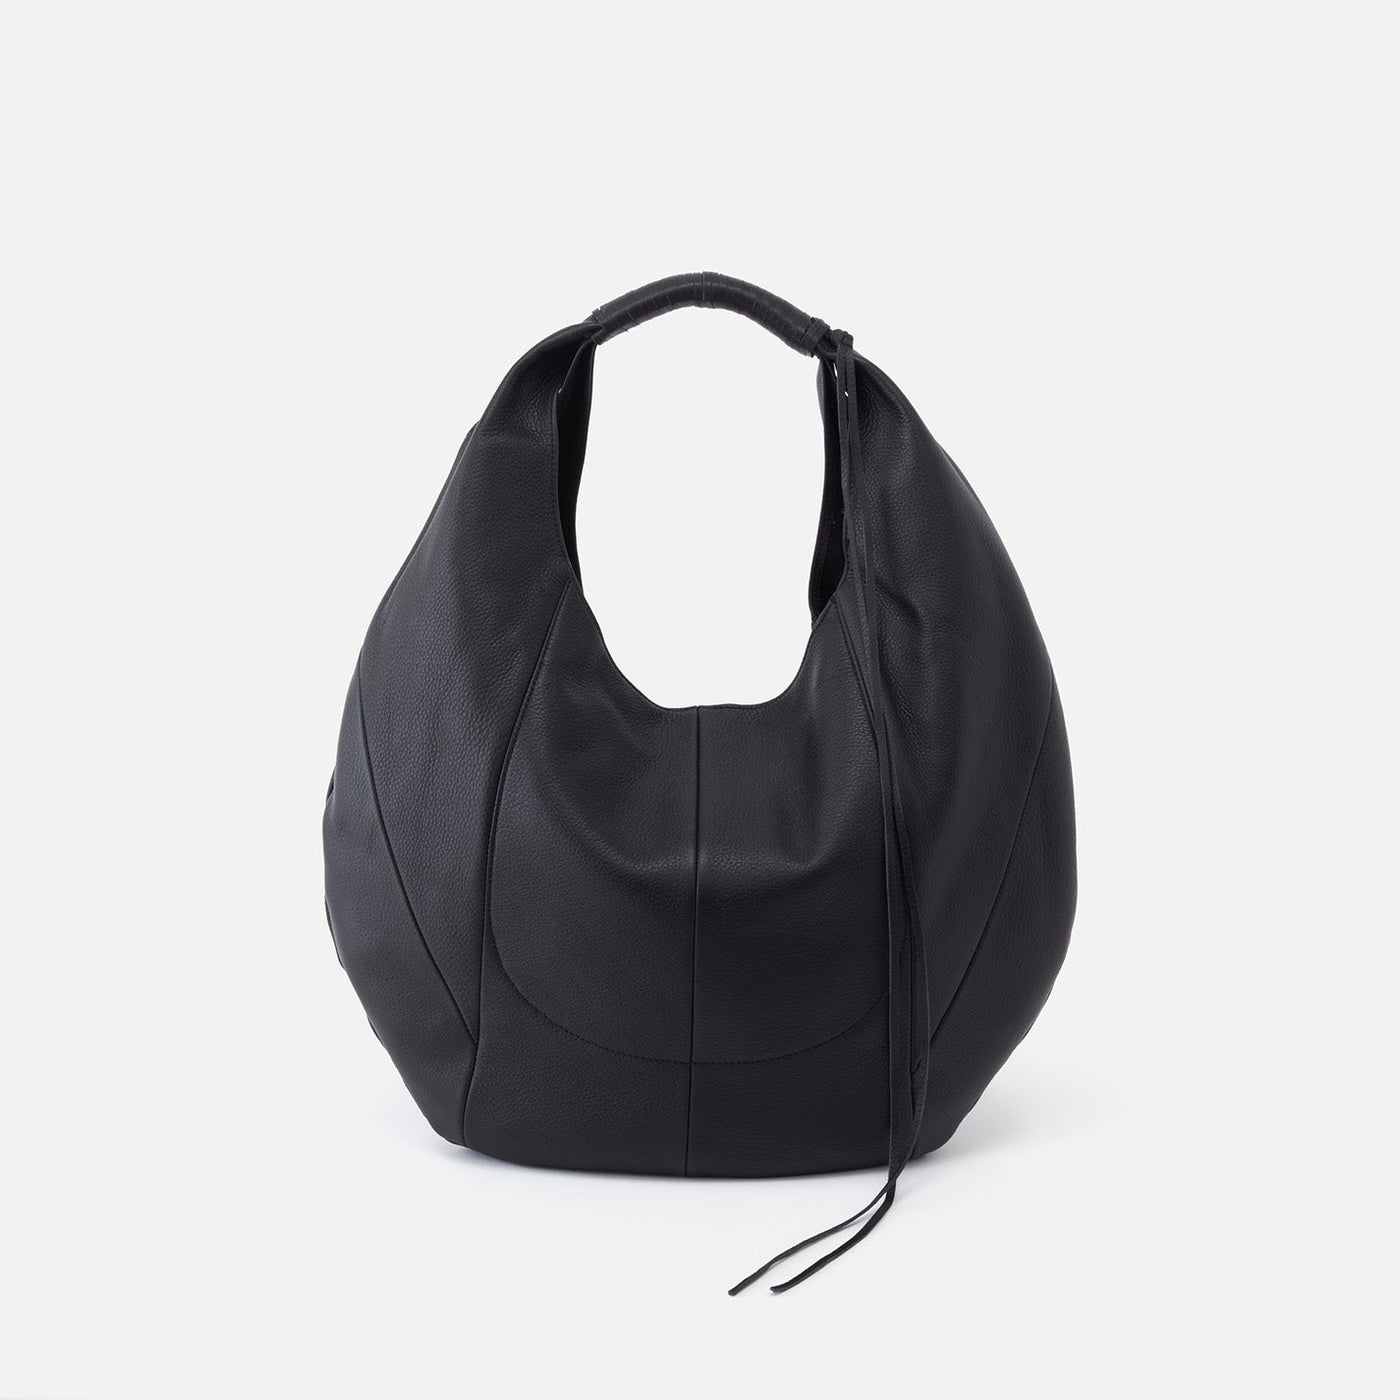 All Black and Slouchy : r/handbags